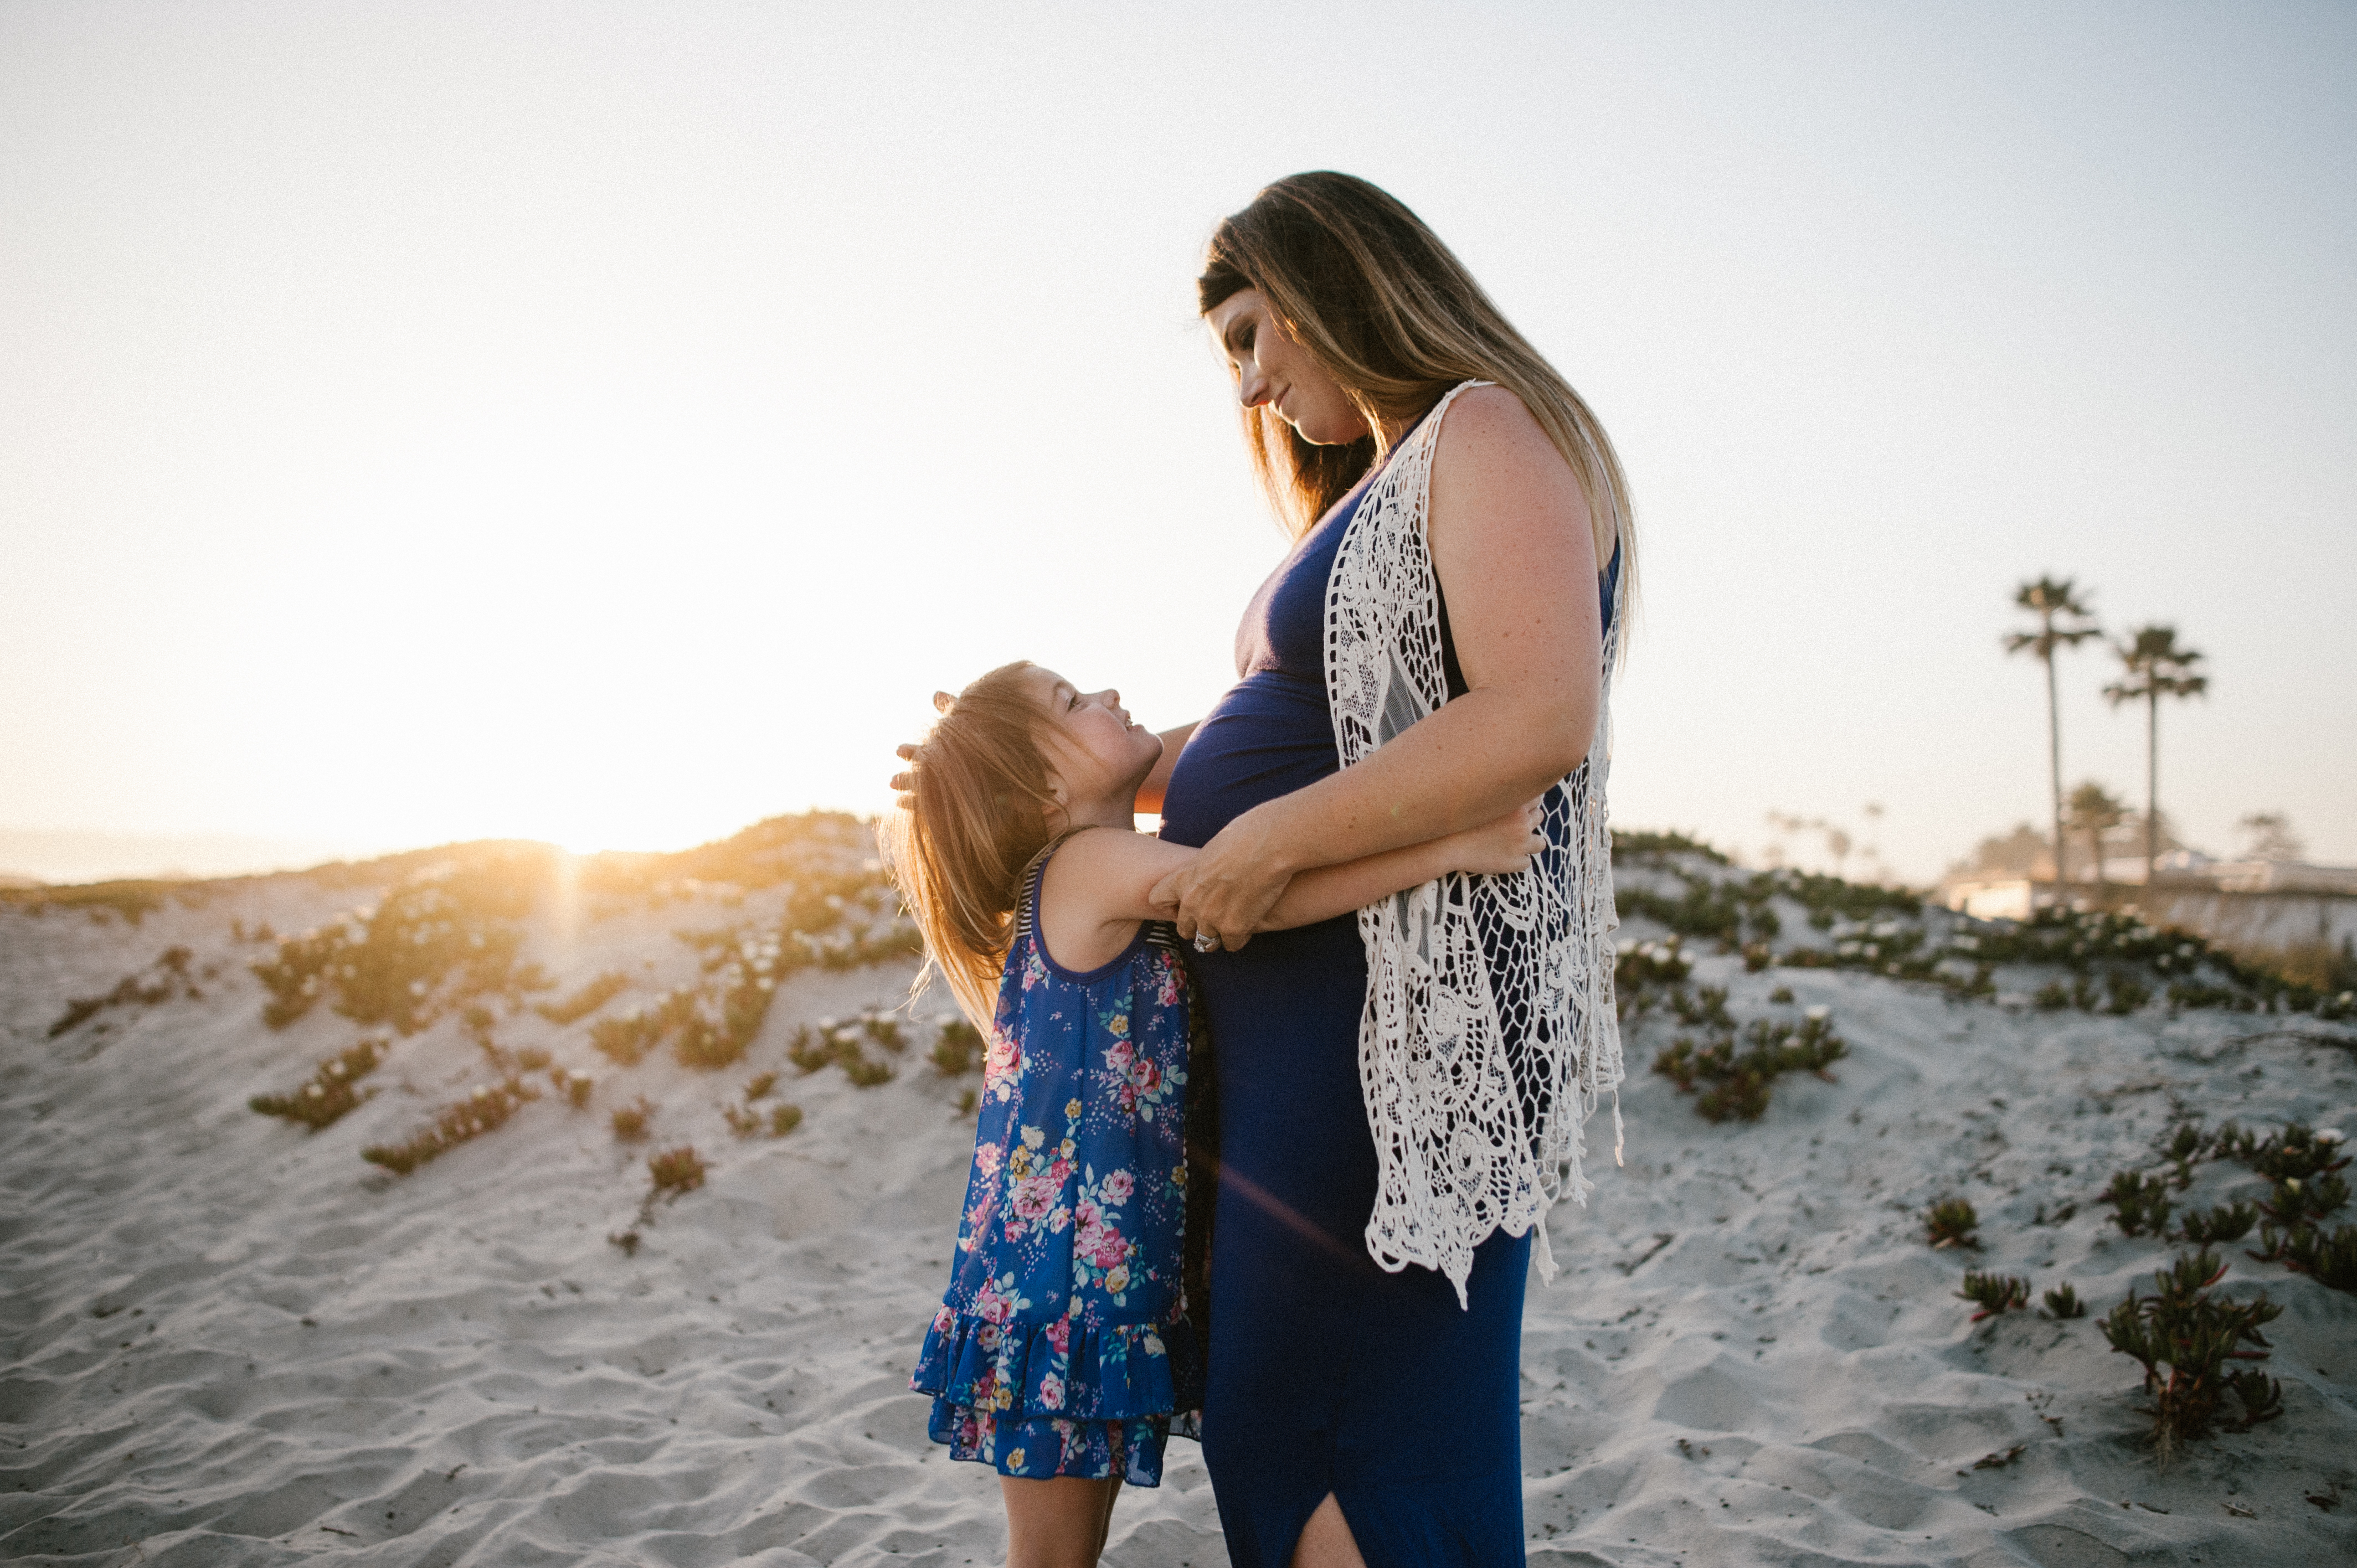 Sister kissing bellyfamily session at Coronado Beach by Kylie Rae Photography